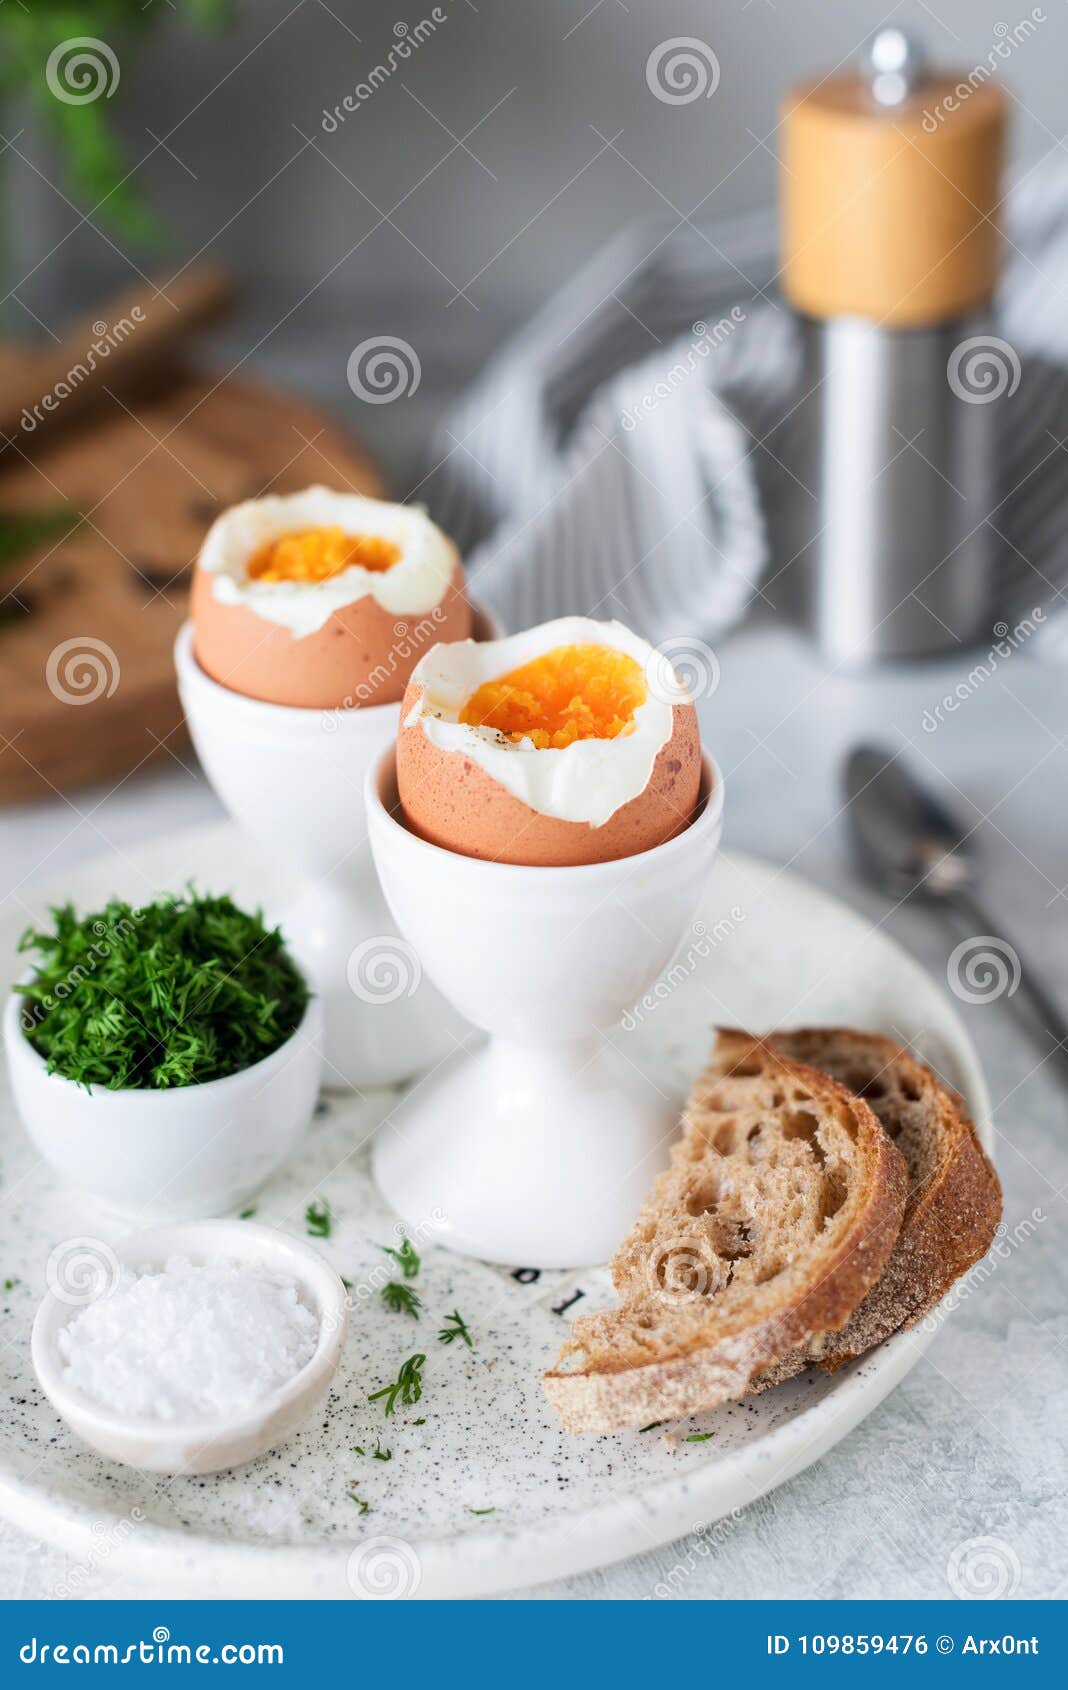 Soft Boiled Eggs and Toasts for Breakfast Stock Photo - Image of eggs ...